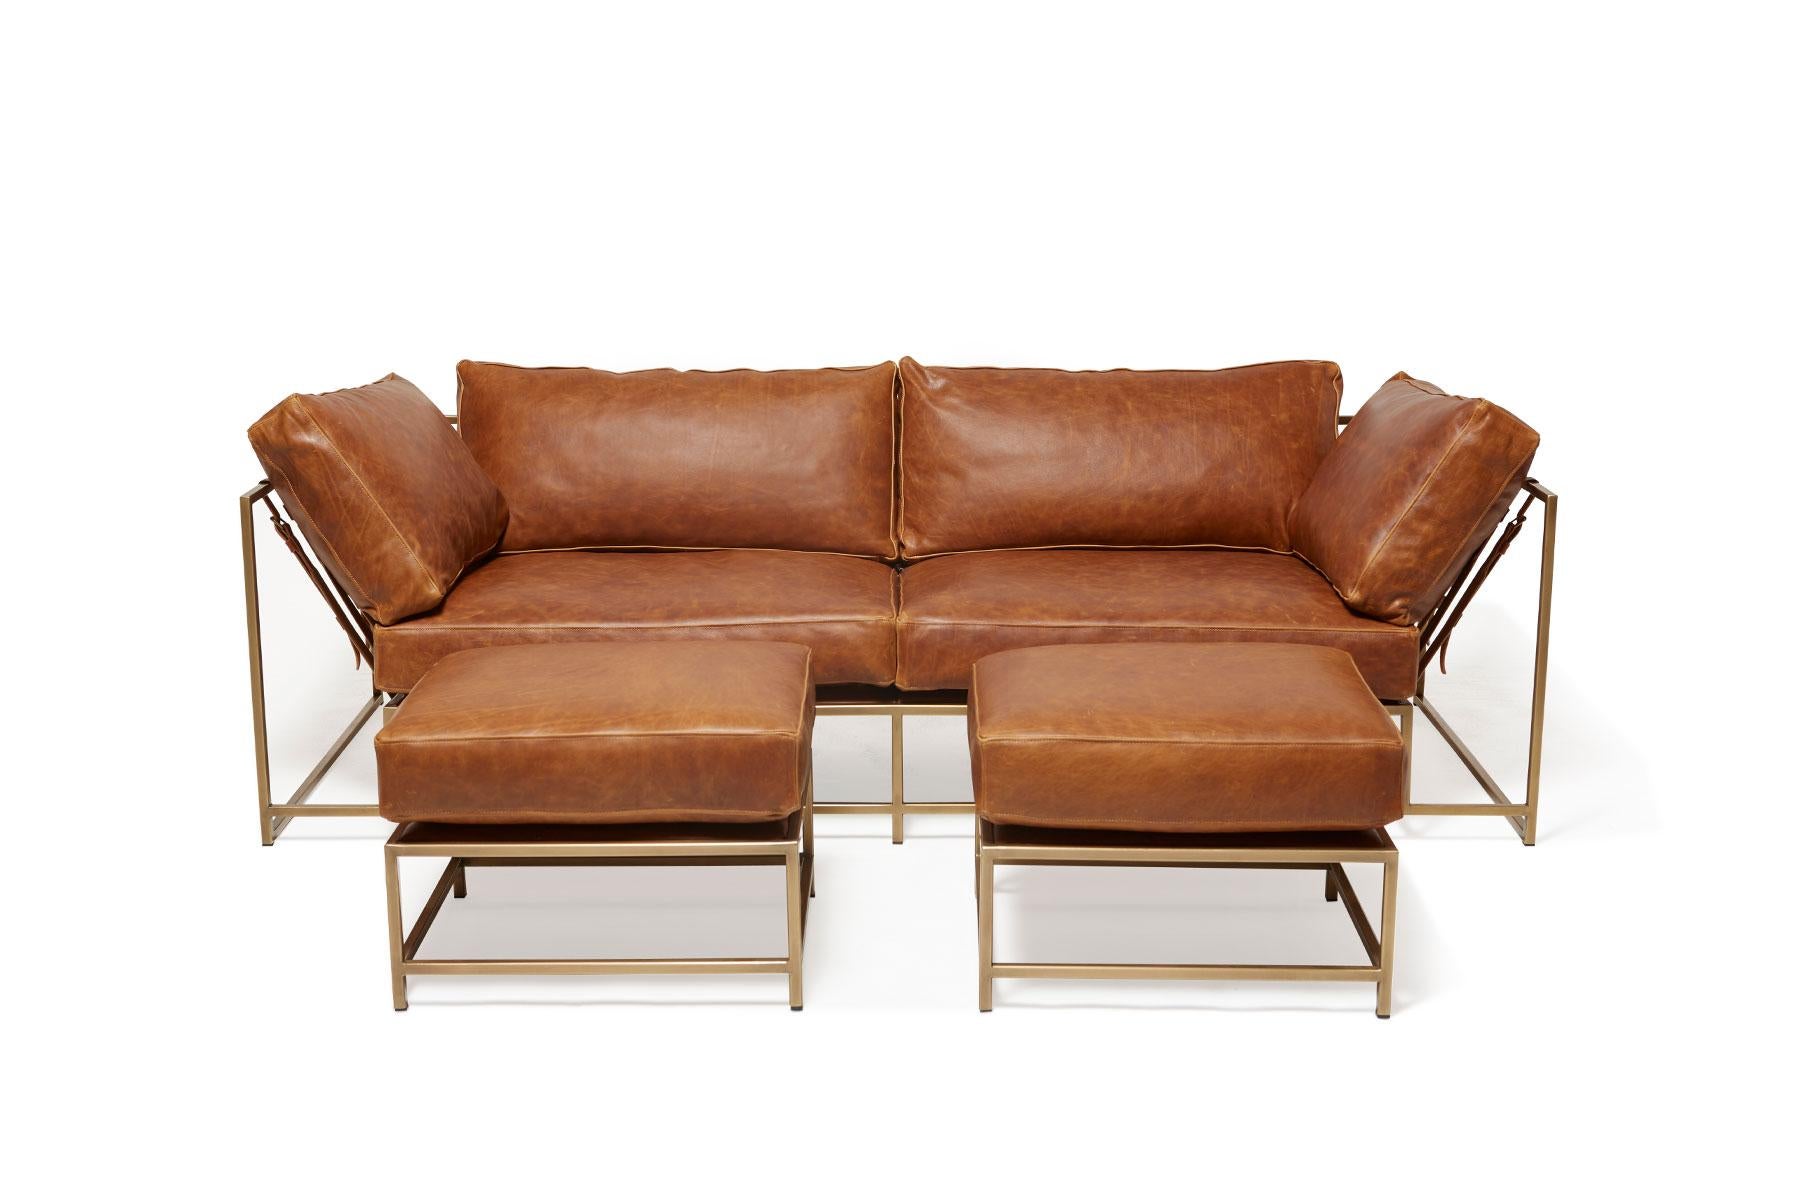 This set, featuring the two-seat sofa and two ottomans from Stephen Kenn's Inheritance collection, is ideal for apartments or smaller spaces requiring a smaller footprint.

This set is upholstered in a beautiful waxed tan leather from the Potomac